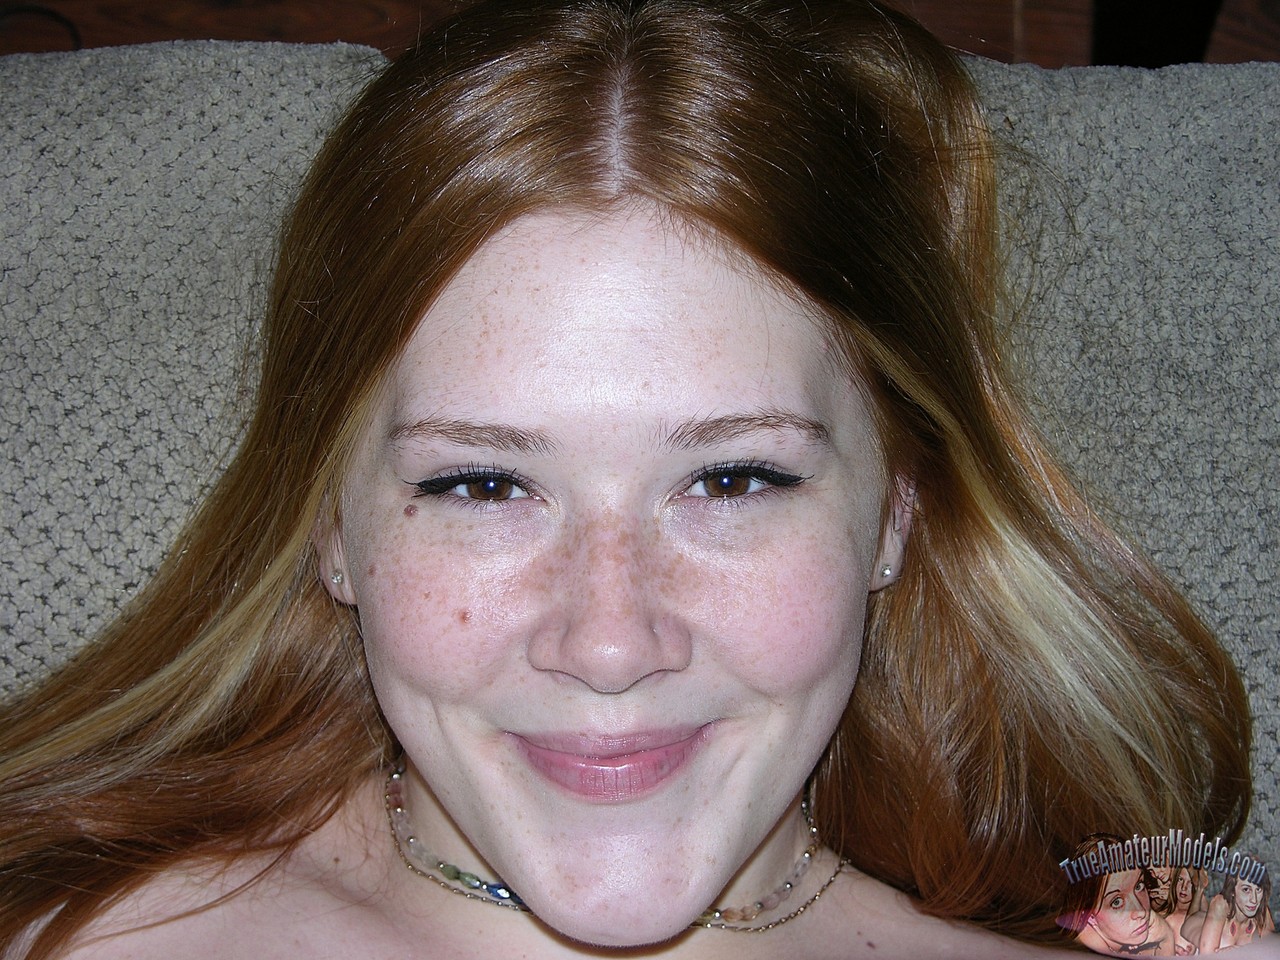 Freckled Face Redhead Amateur Teen Pulling Down Shorts To Expose Butthole foto porno #422855440 | True Amateur Models Pics, Harper R, Face, porno mobile